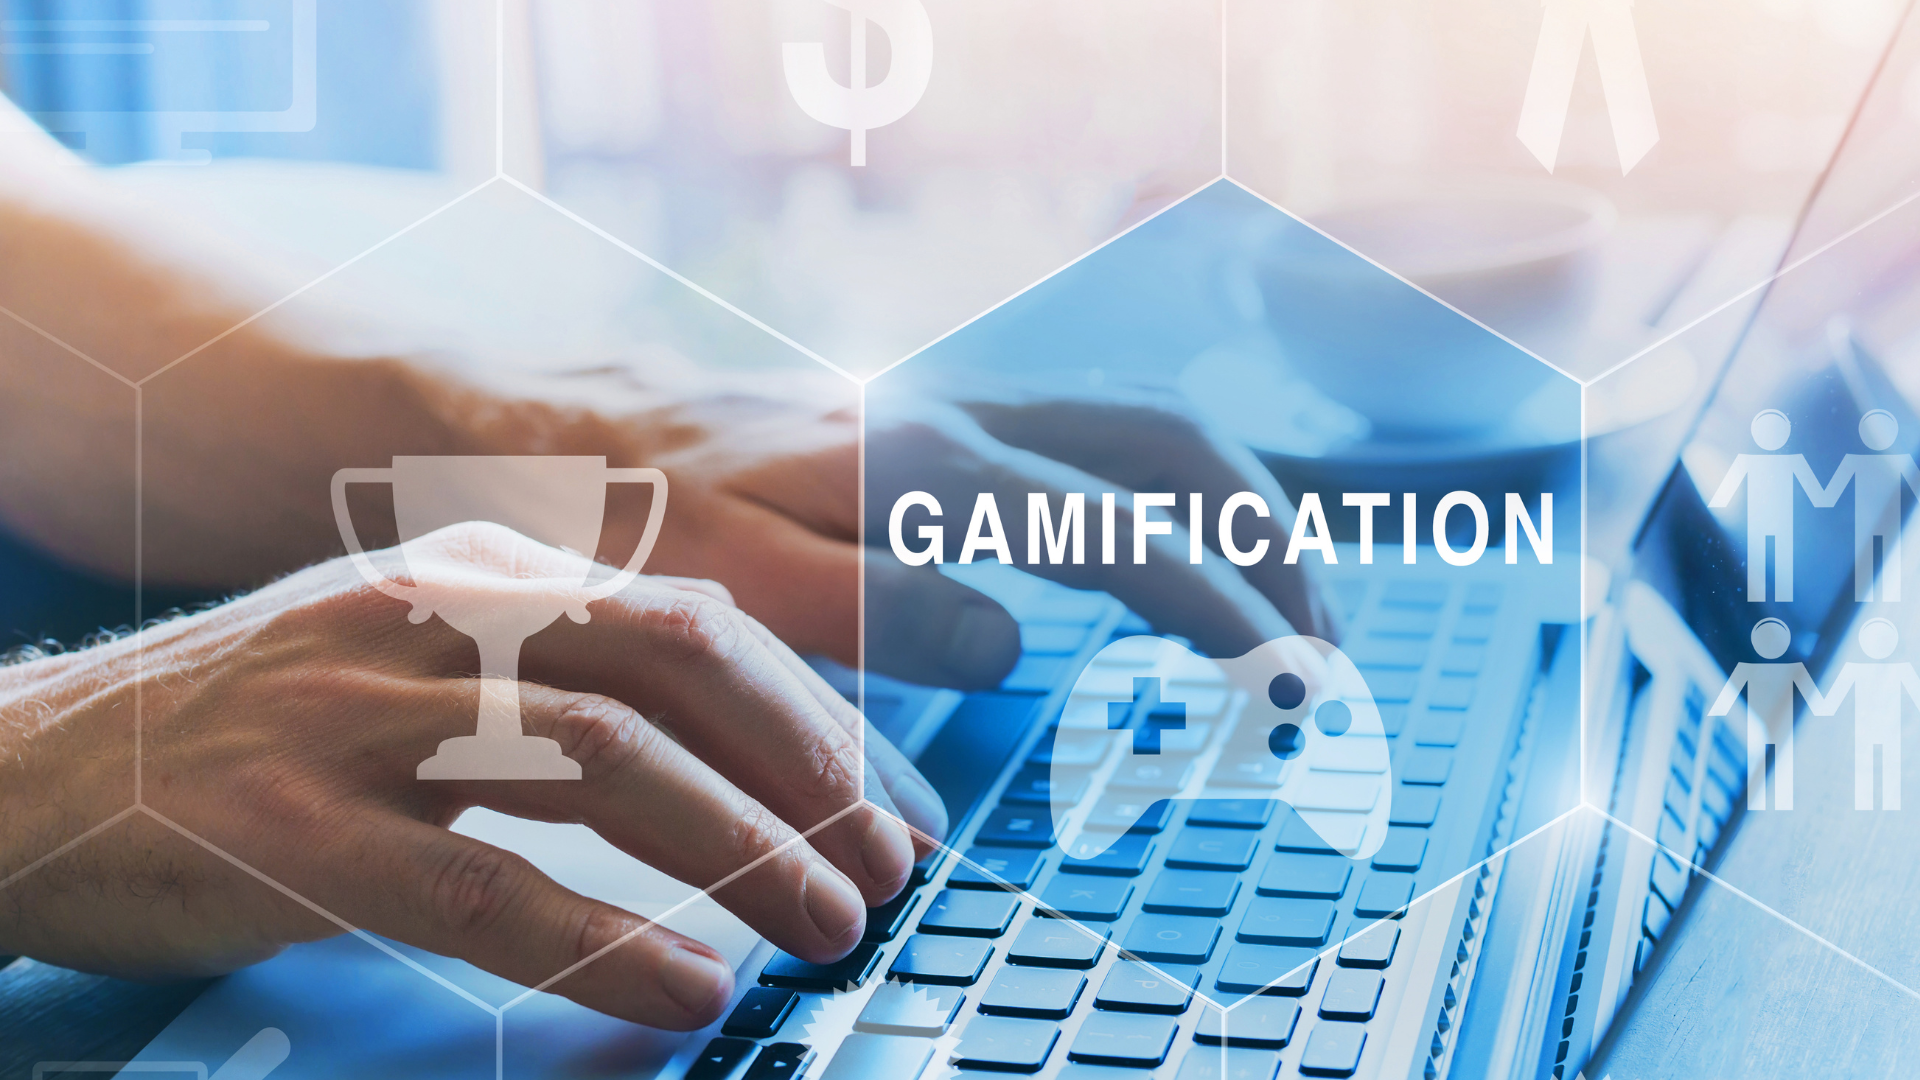 Gamification: The Benefits of Making Remote Patient Monitoring Fun